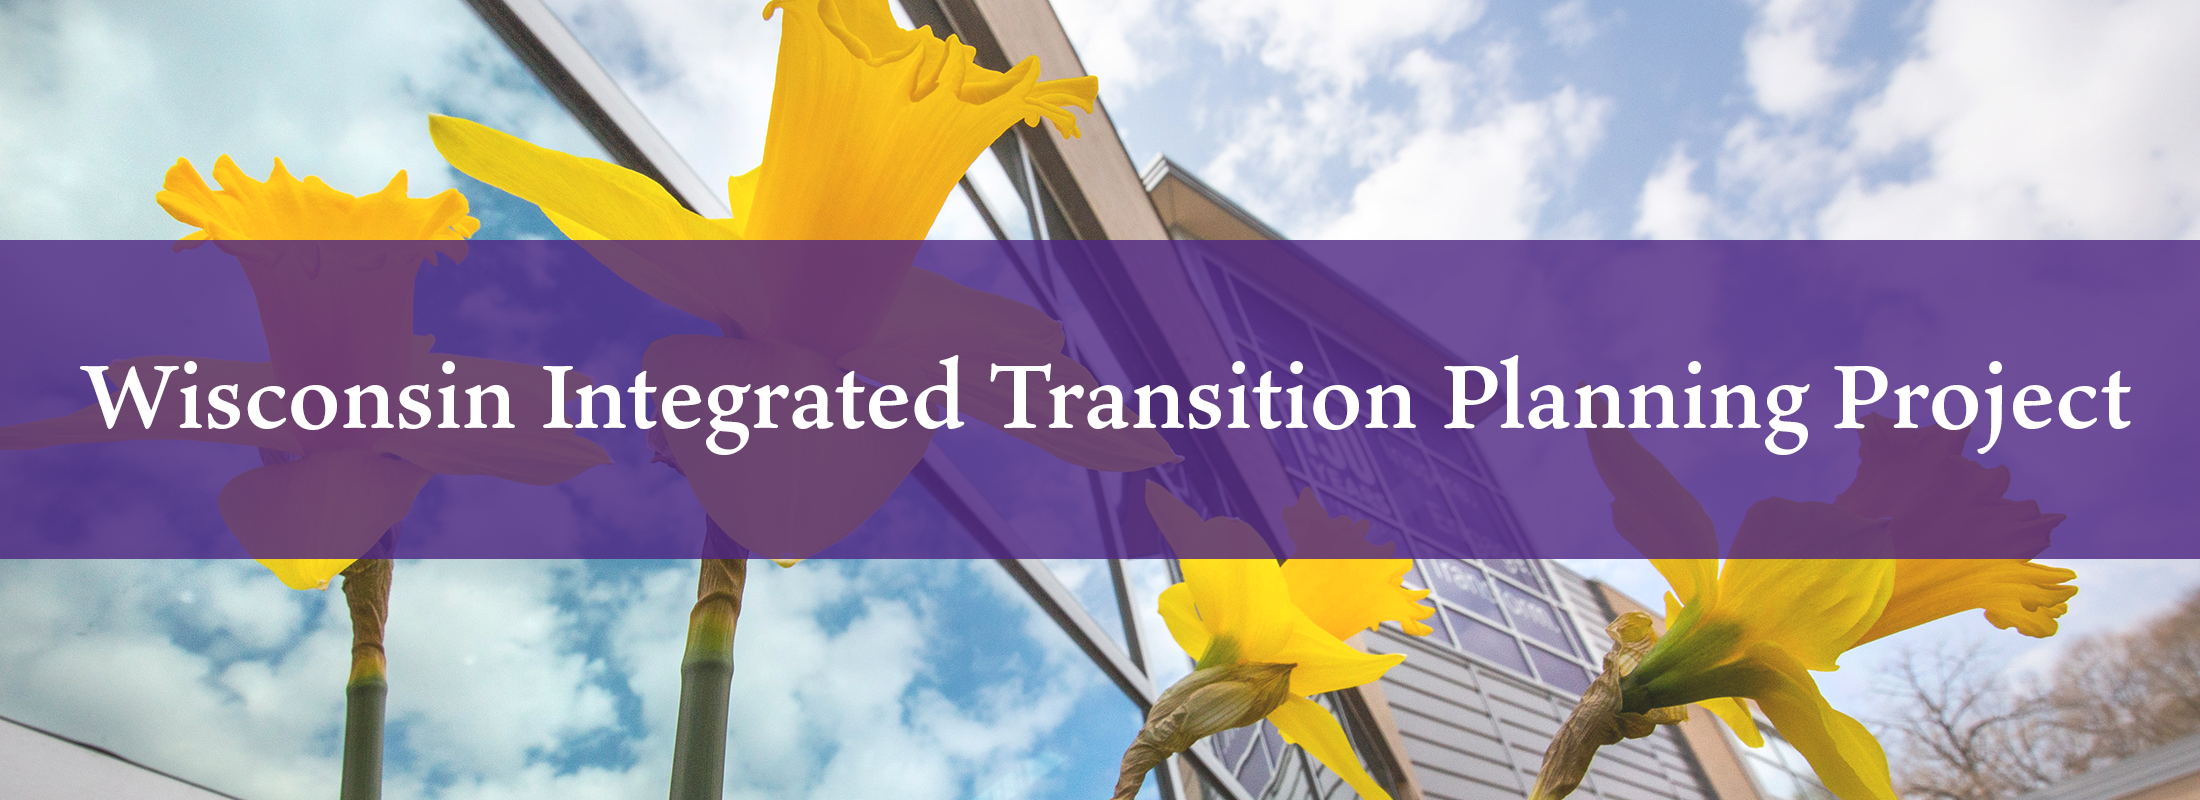 Wisconsin Integrated Transition Planning Project Banner